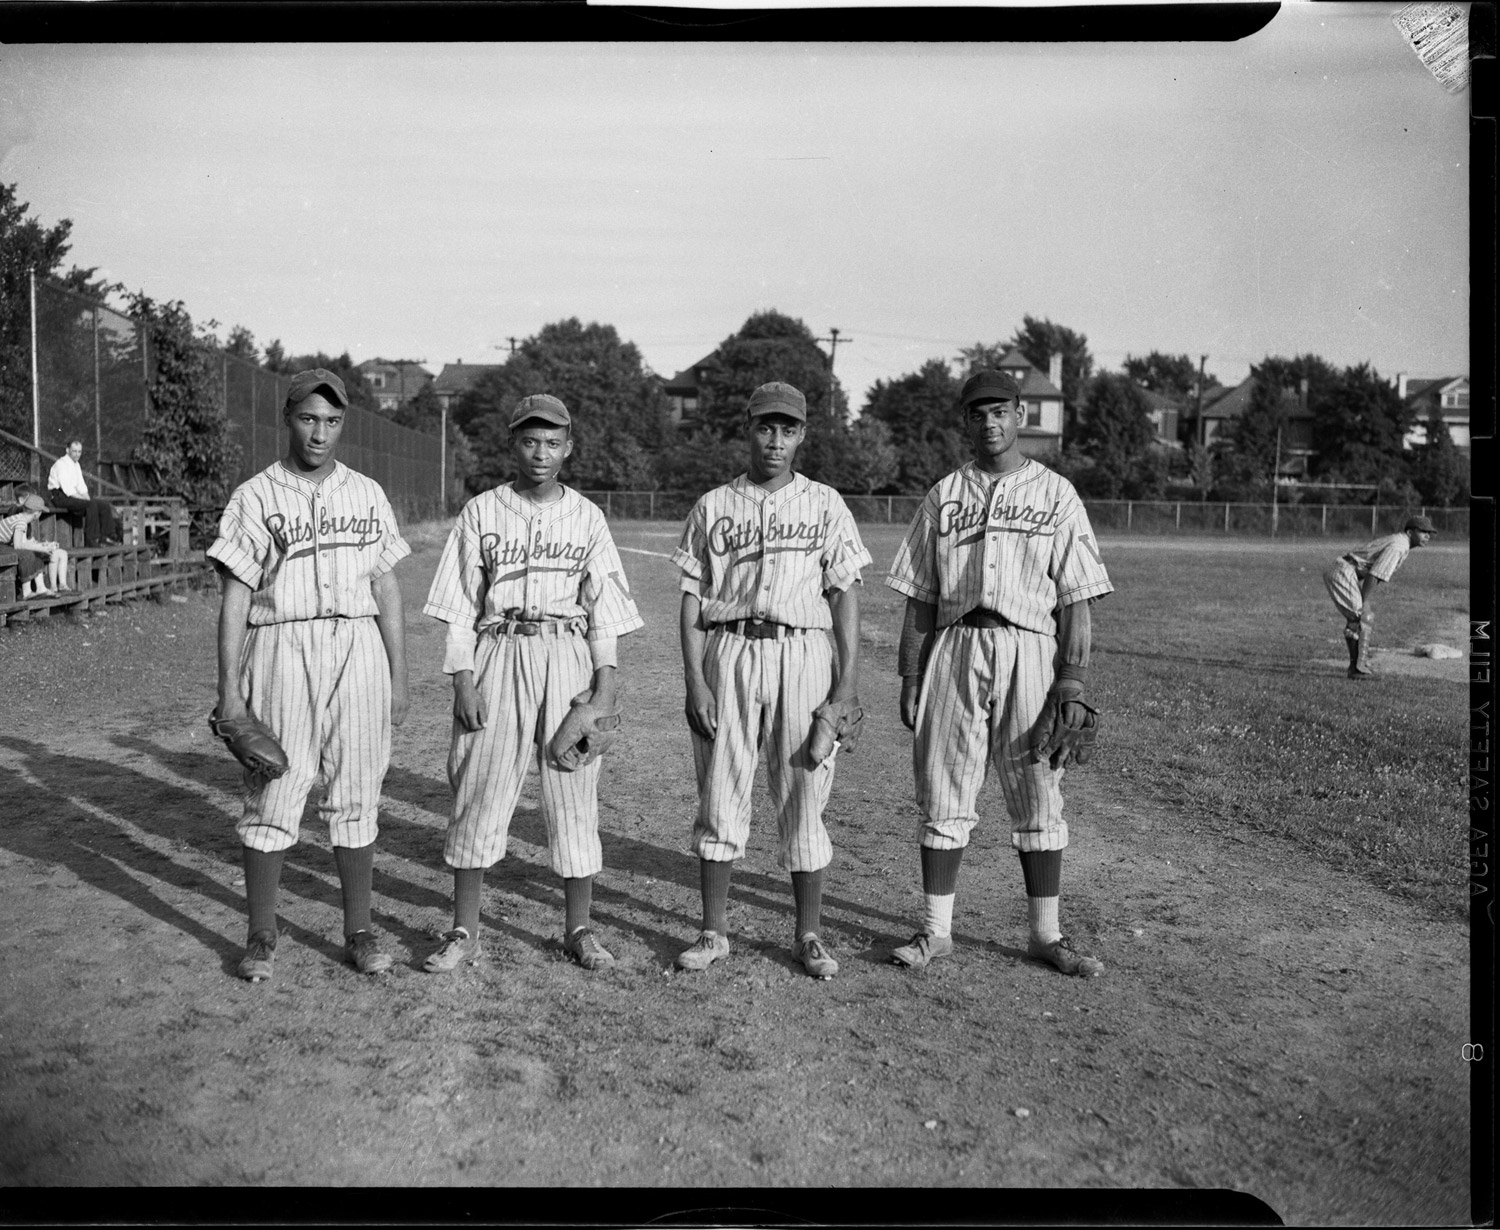 Four Pittsburgh Crawfords baseball players standing on a field, May 1945.